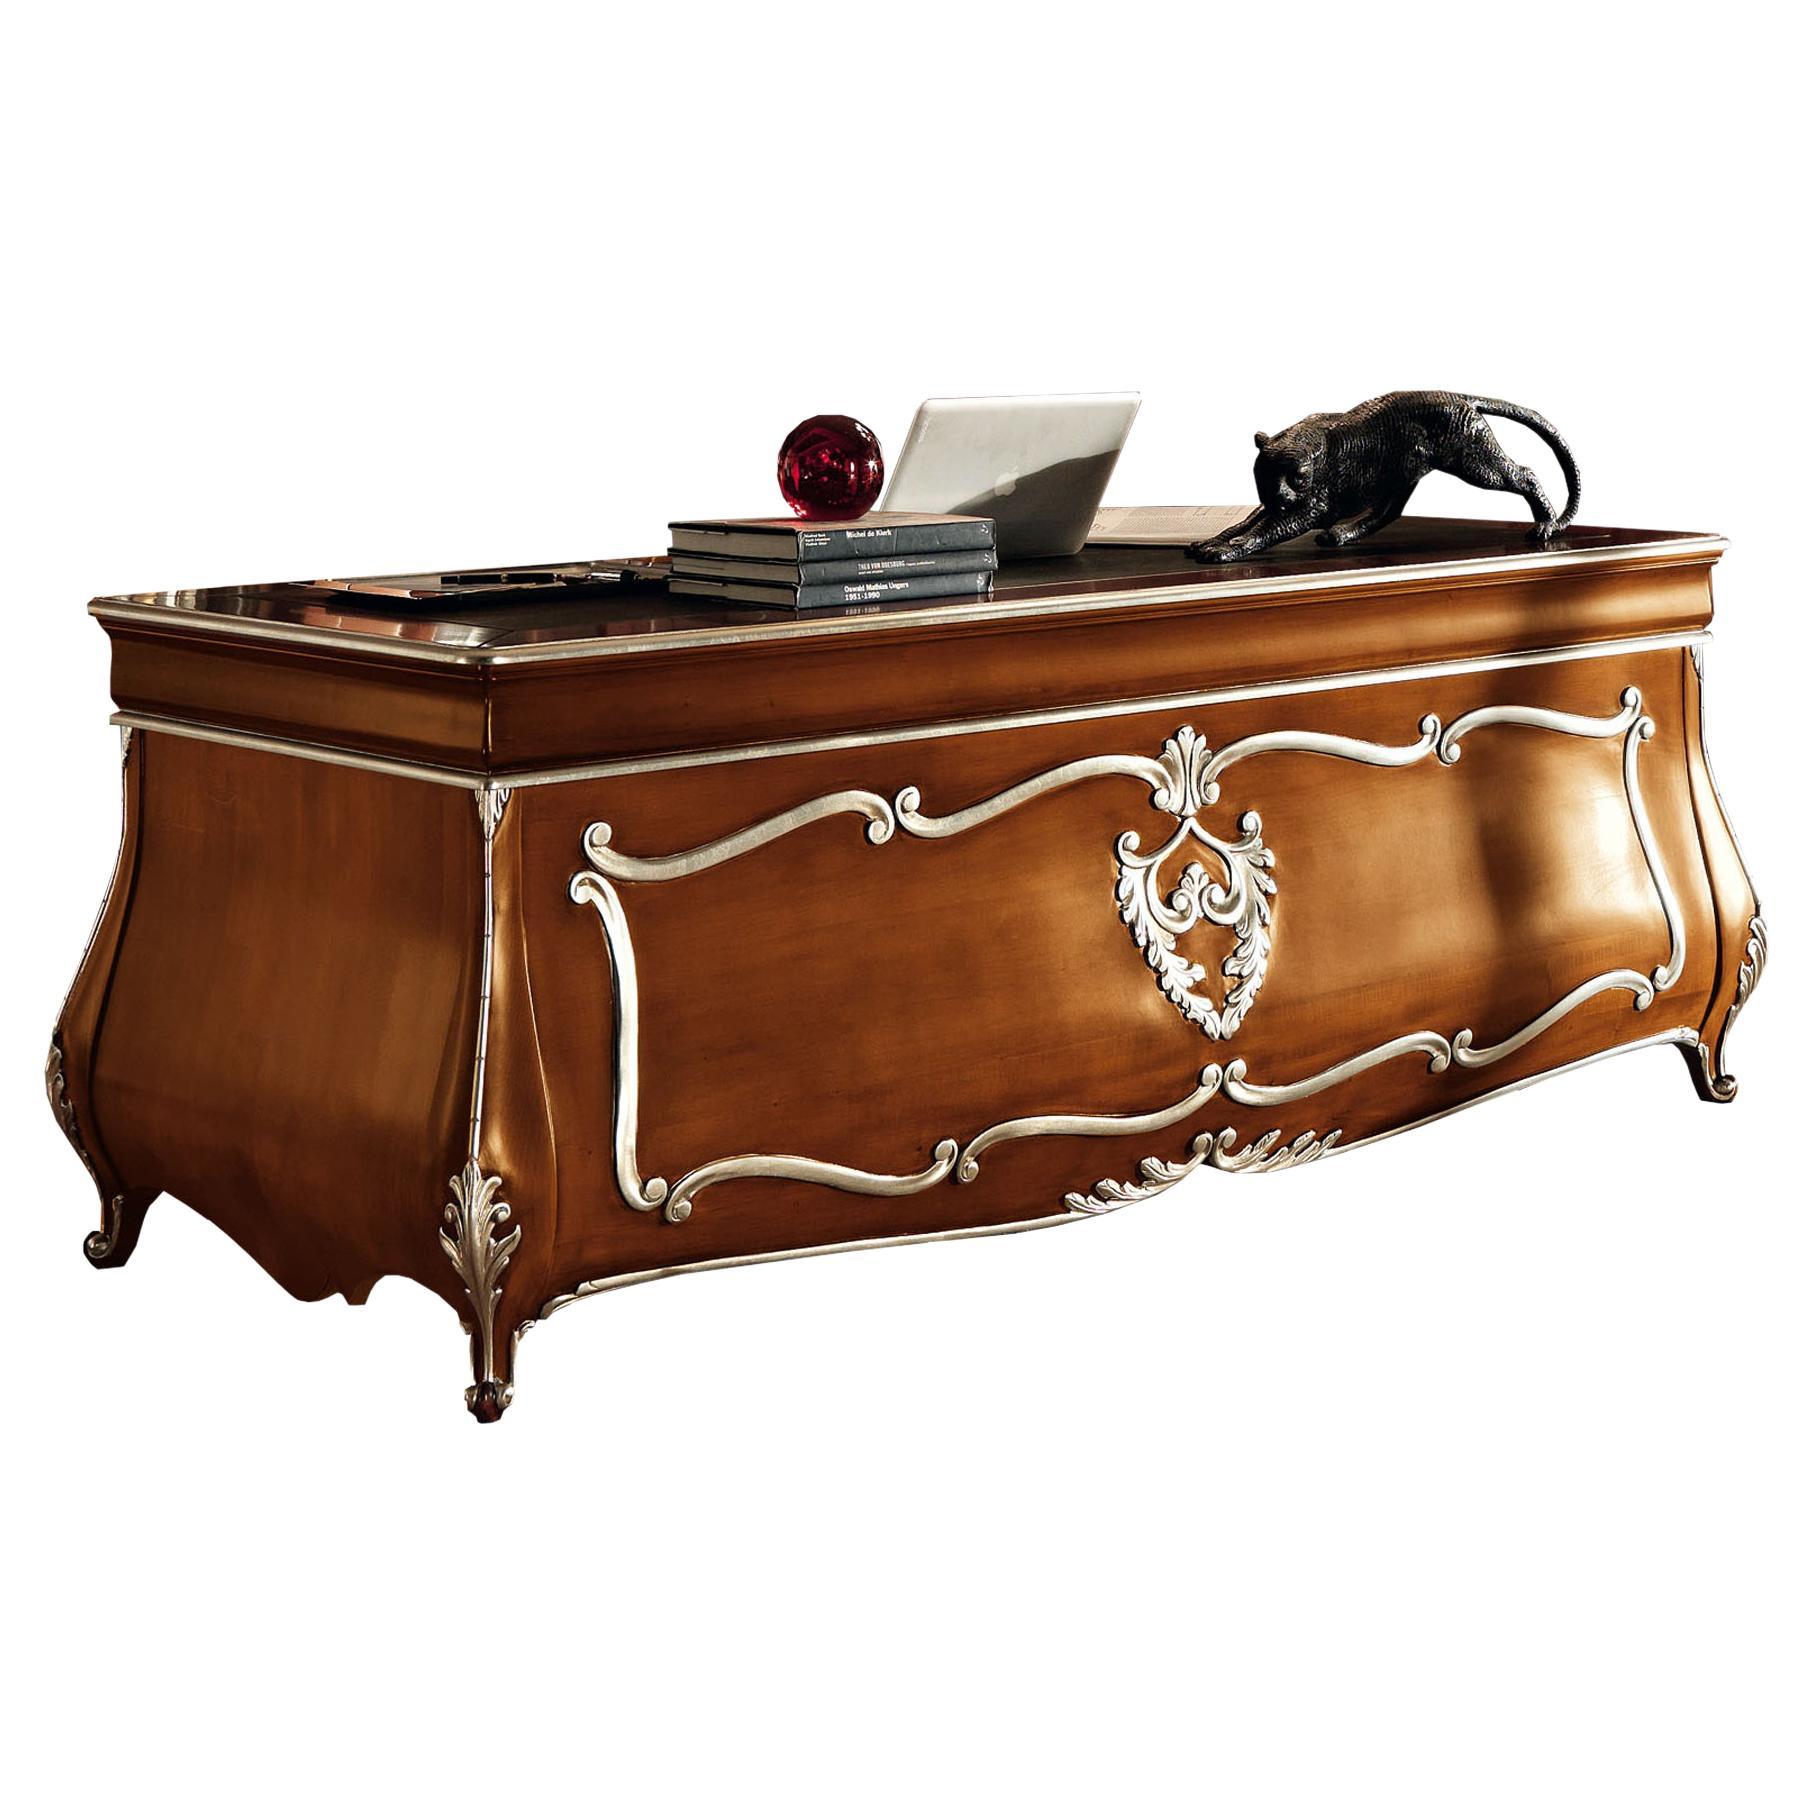 Domed Baroque Office Desk with Silver Leaf Details and Leather Top by Modenese For Sale